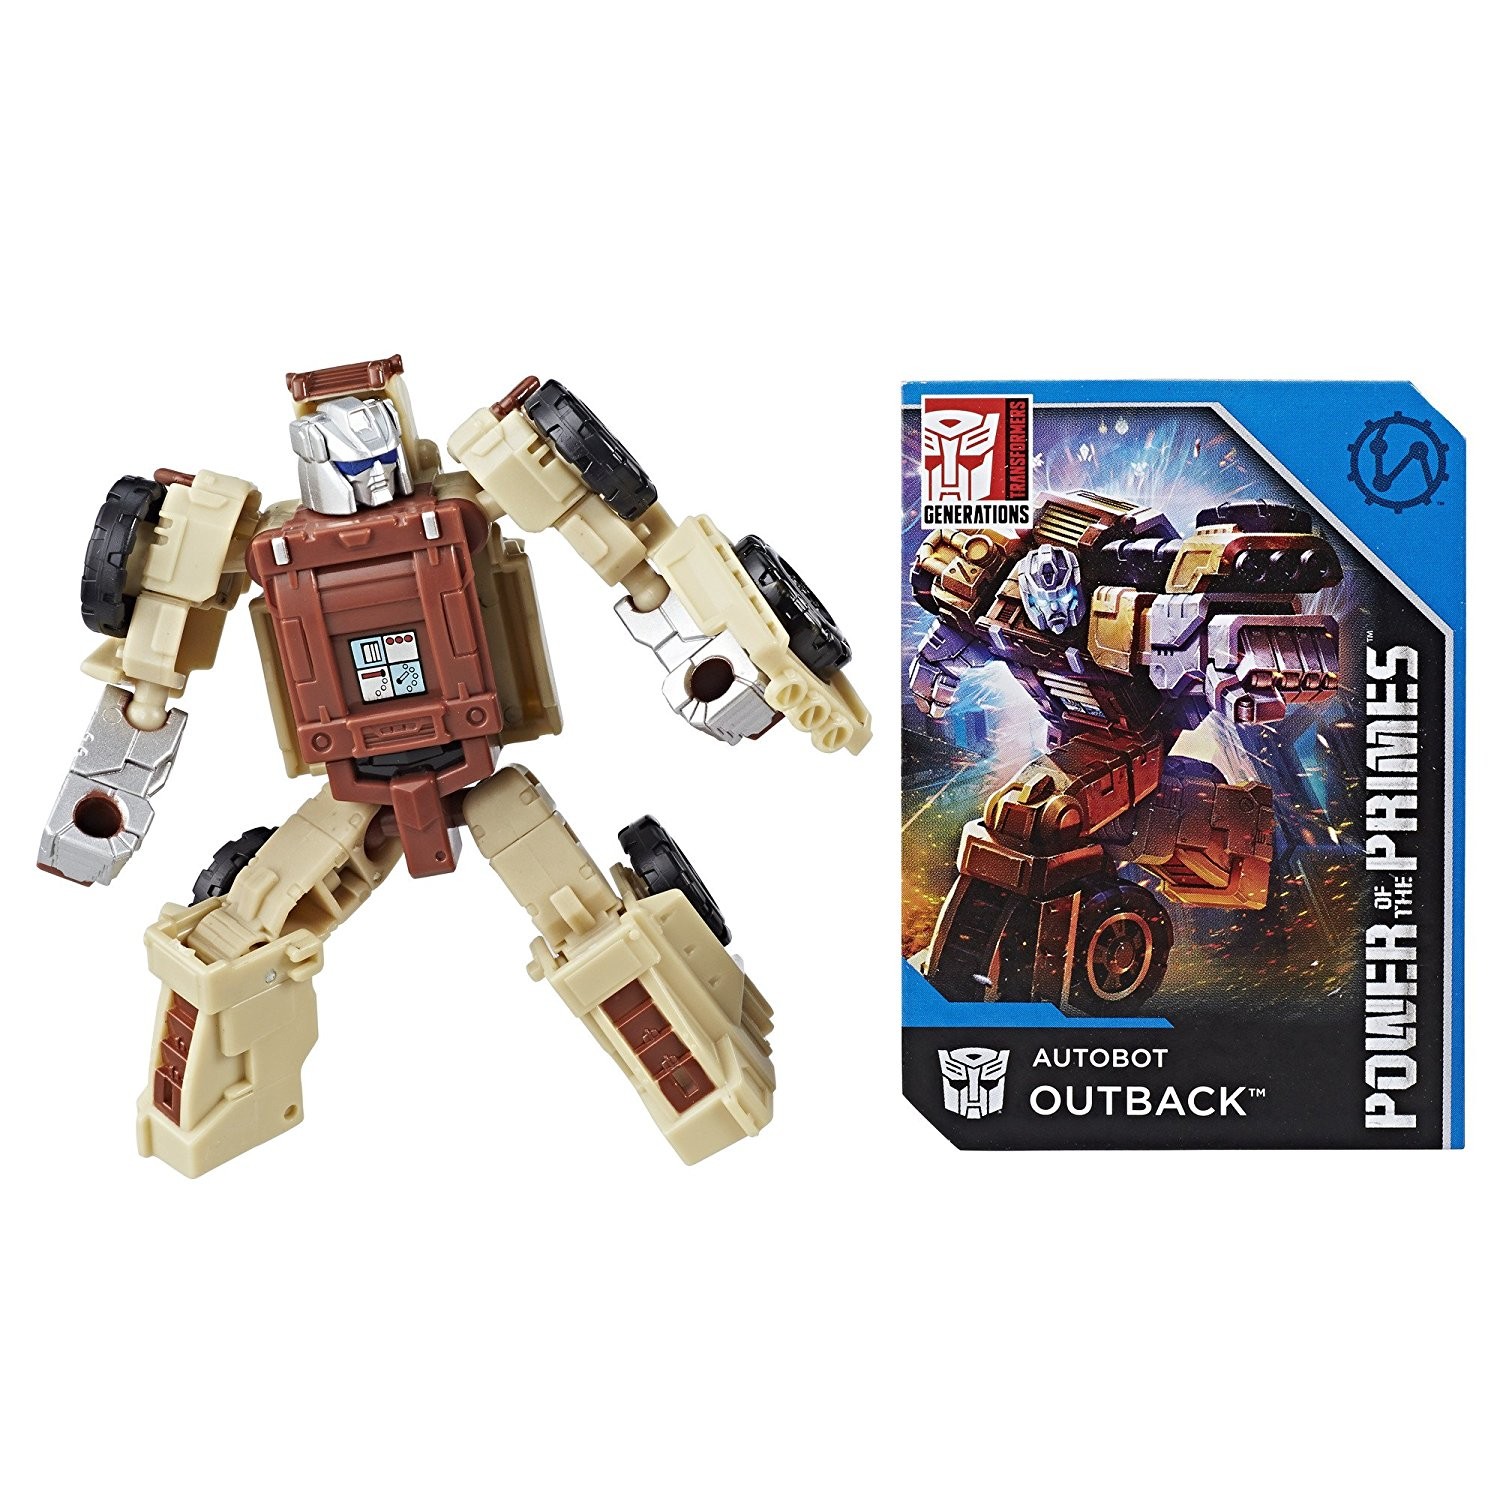 Transformers News: Transformers Power of the Primes Autobot Outback and Cindersaur Listed Online!